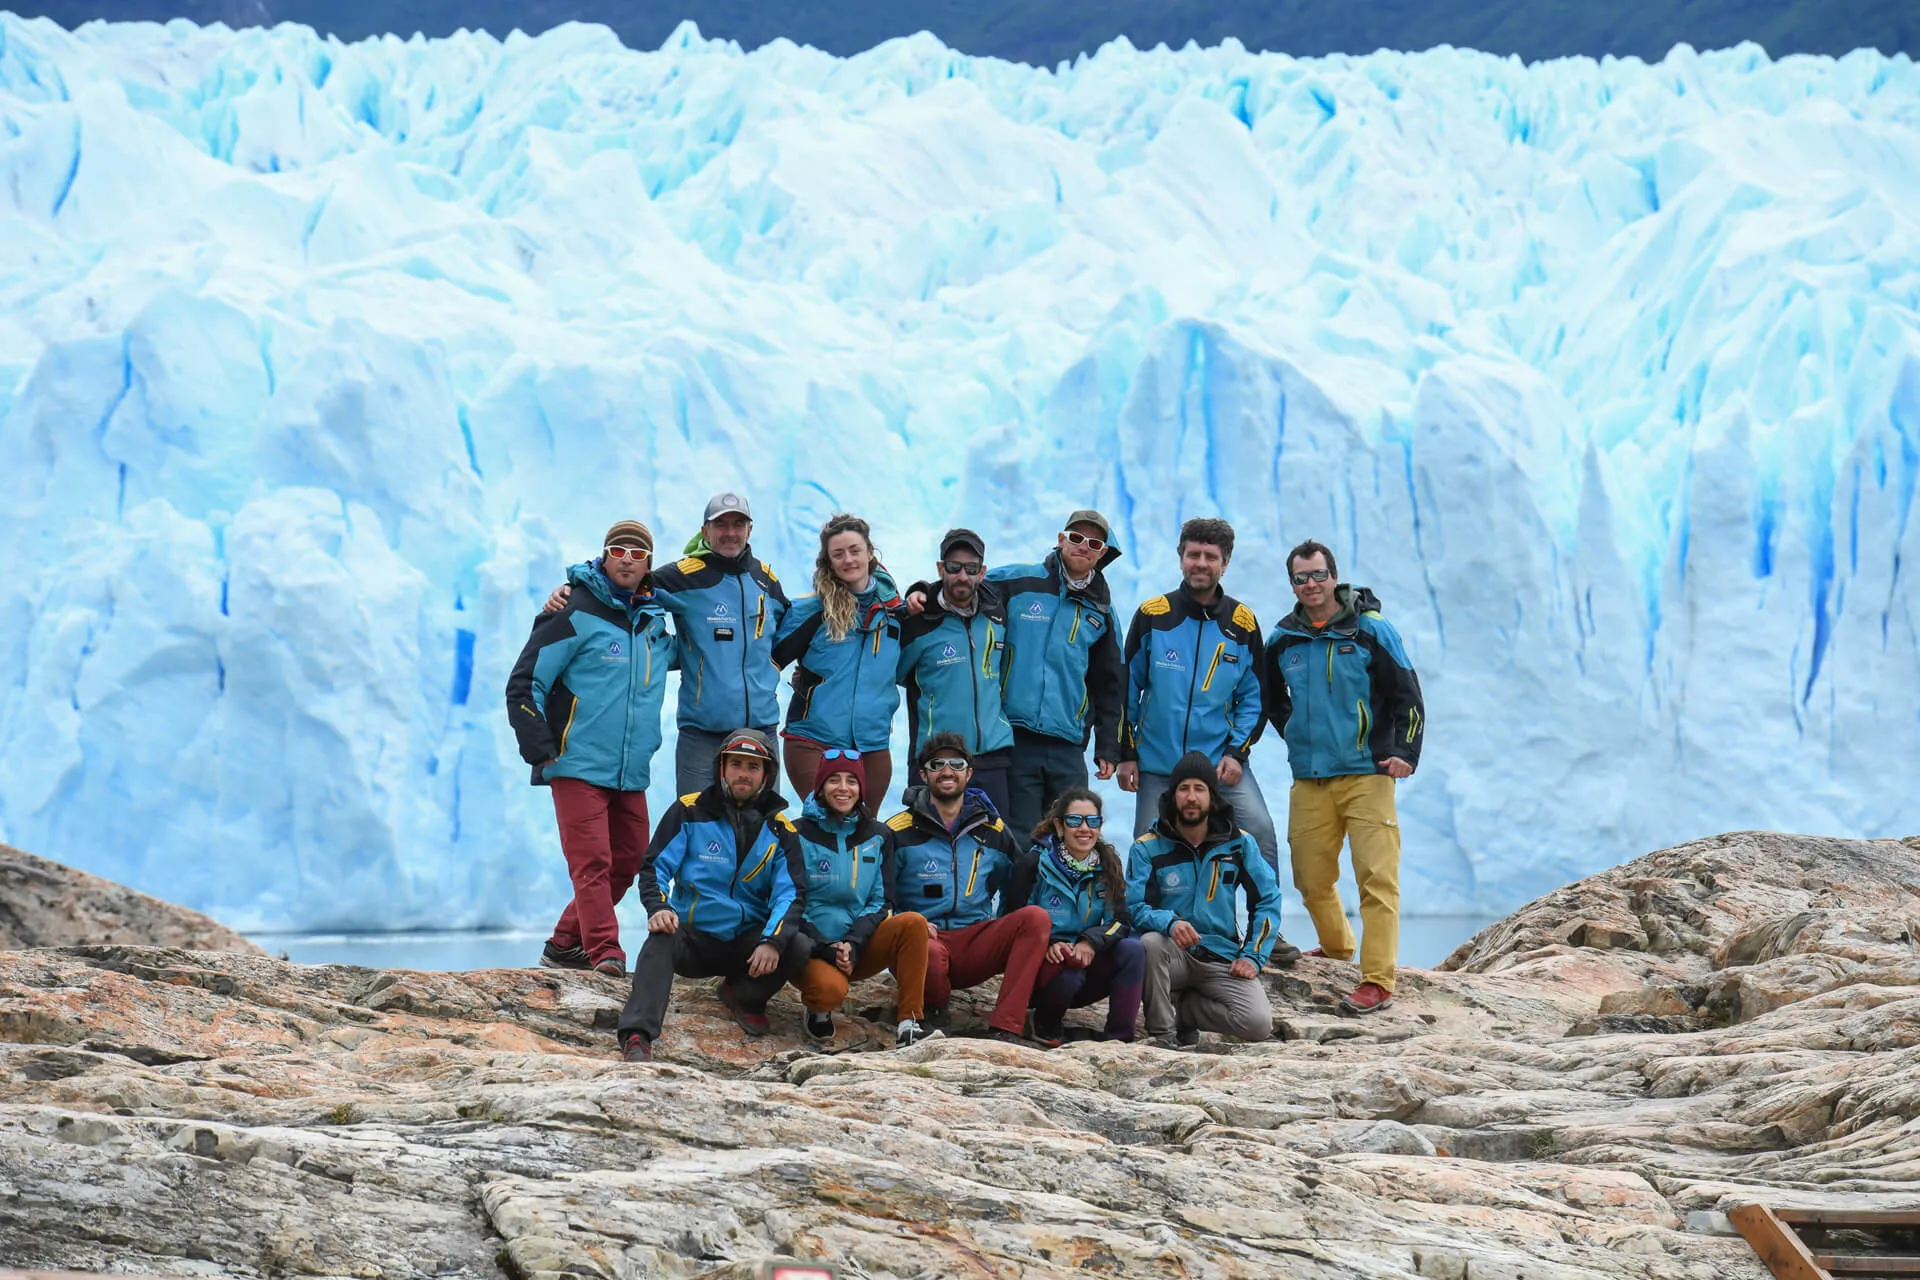 Hielo & Aventura in Argentina, South America | Excursions - Rated 4.6